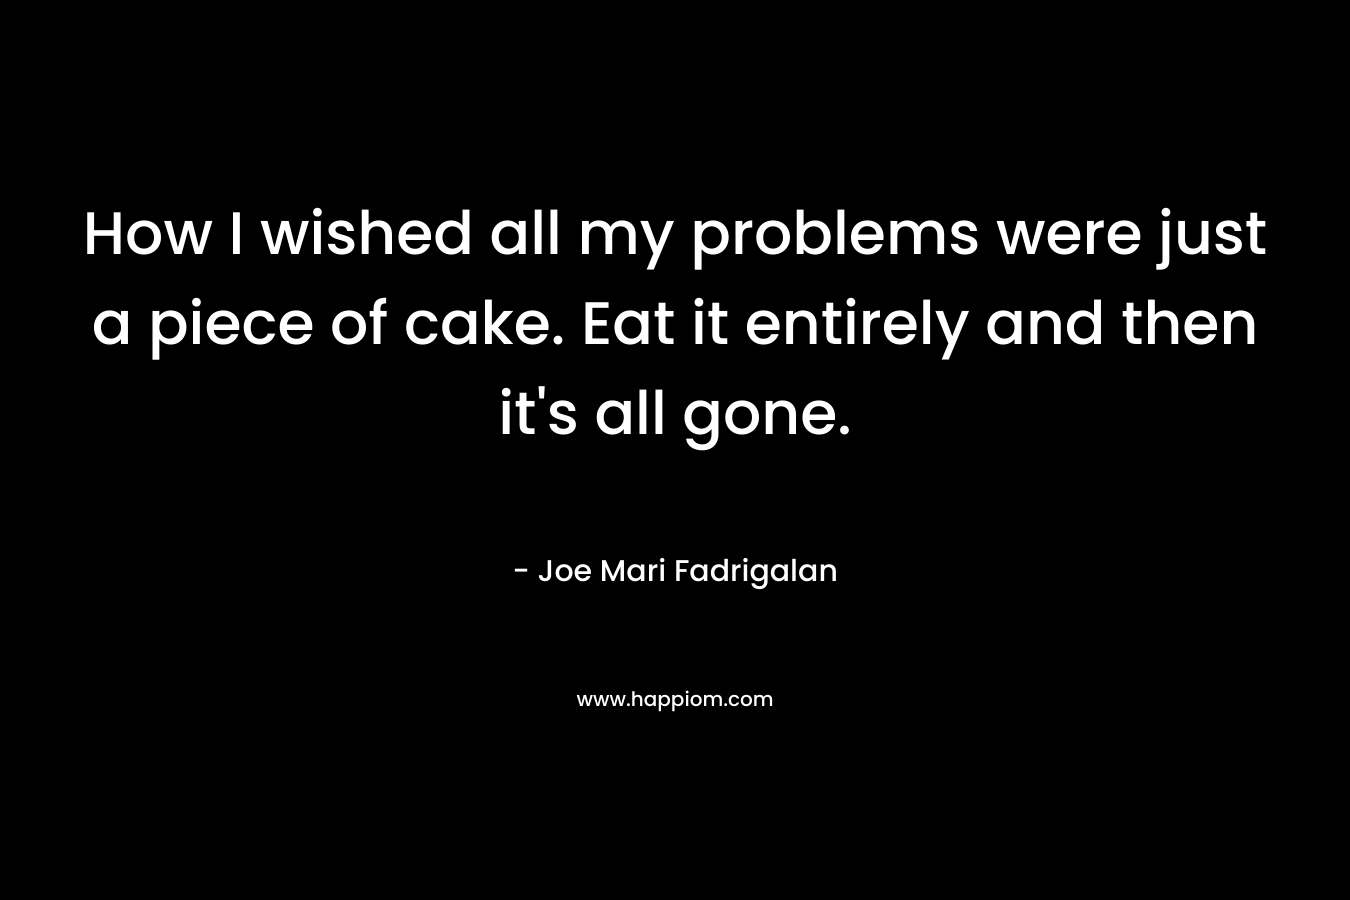 How I wished all my problems were just a piece of cake. Eat it entirely and then it's all gone.